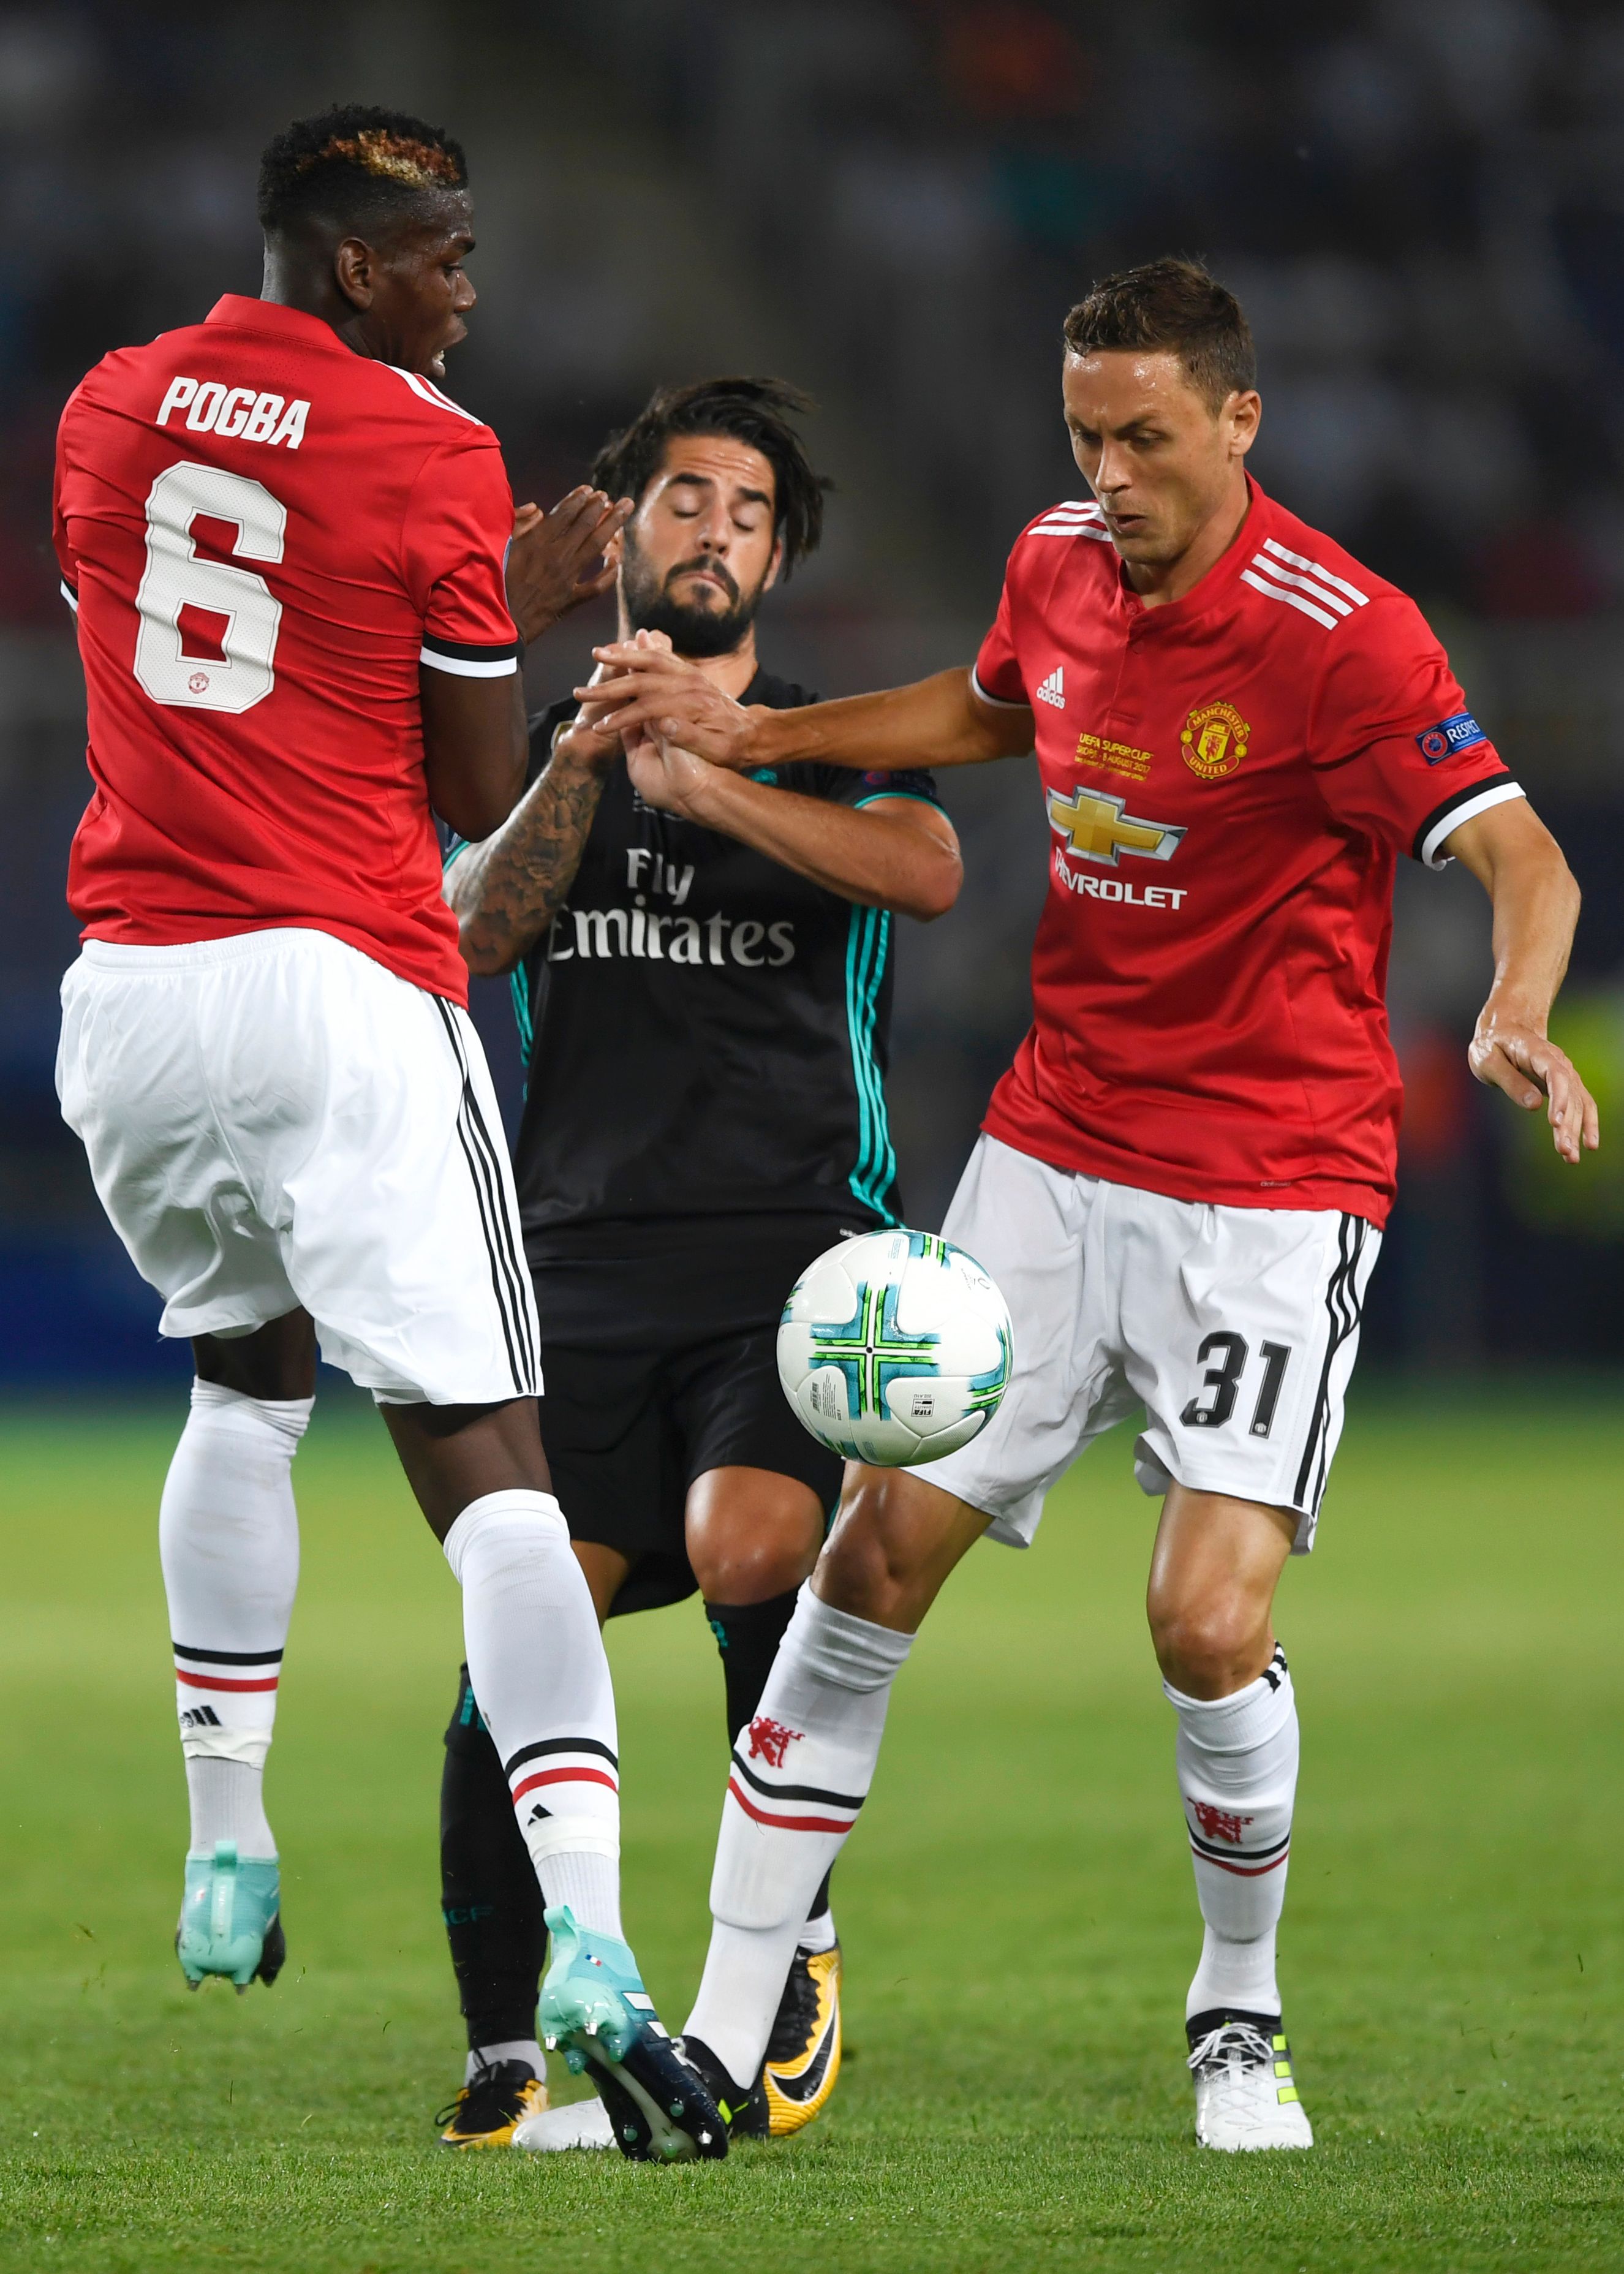 Real Madrid's Spanish midfielder Isco (C) vies with Manchester United's Serbian midfielder Nemanja Matic (R) and Manchester United's French midfielder Paul Pogba during the UEFA Super Cup football match between Real Madrid and Manchester United on August 8, 2017, at the Philip II Arena in Skopje. / AFP PHOTO / Dimitar DILKOFF (Photo credit should read DIMITAR DILKOFF/AFP/Getty Images)